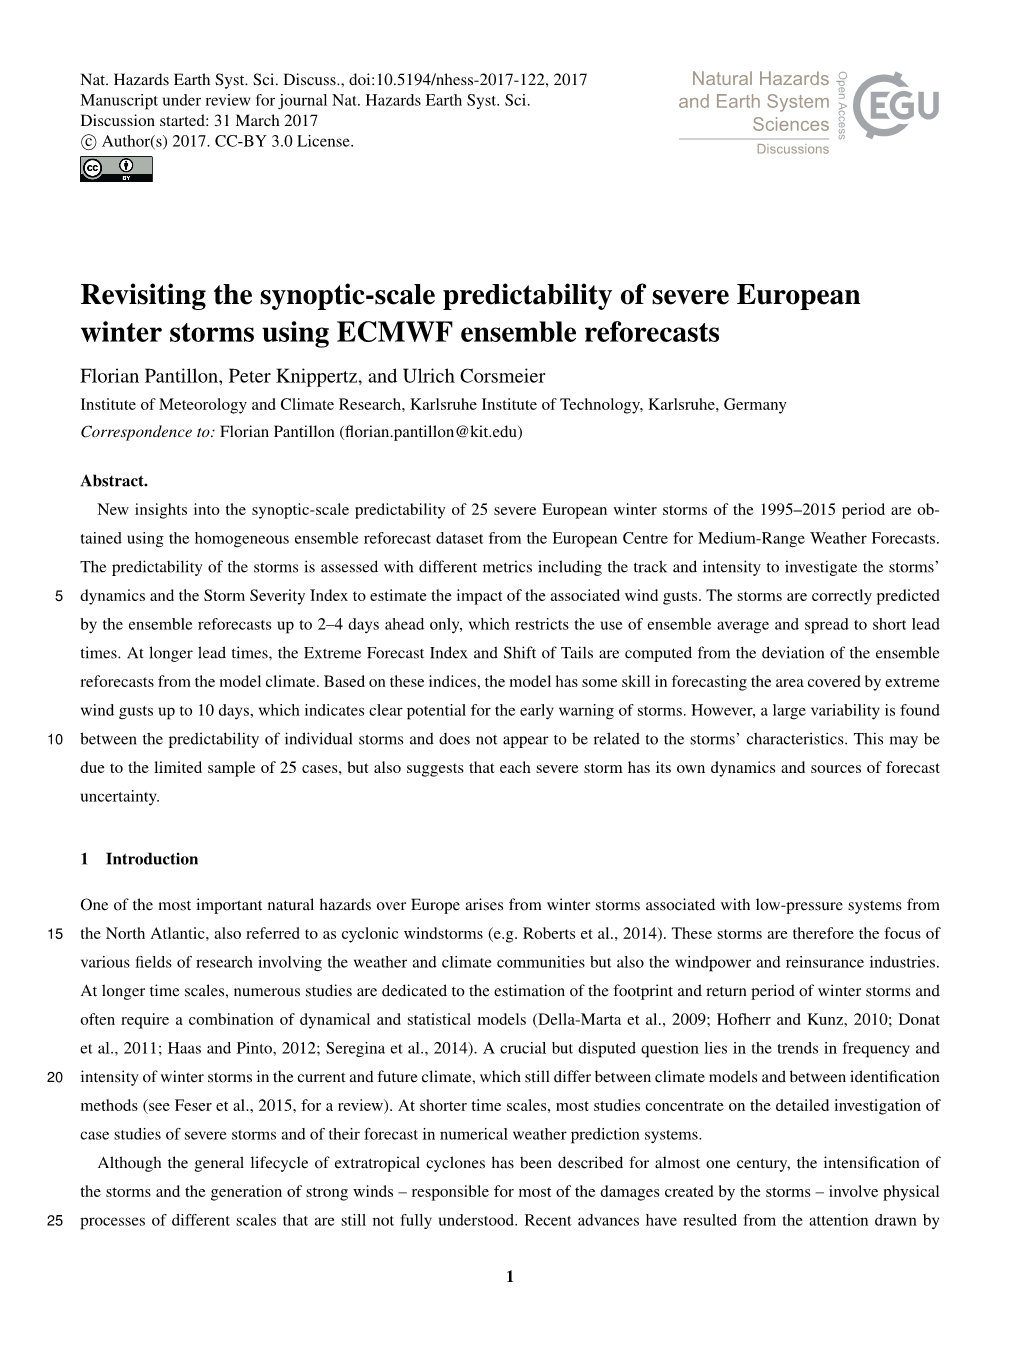 Revisiting the Synoptic-Scale Predictability of Severe European